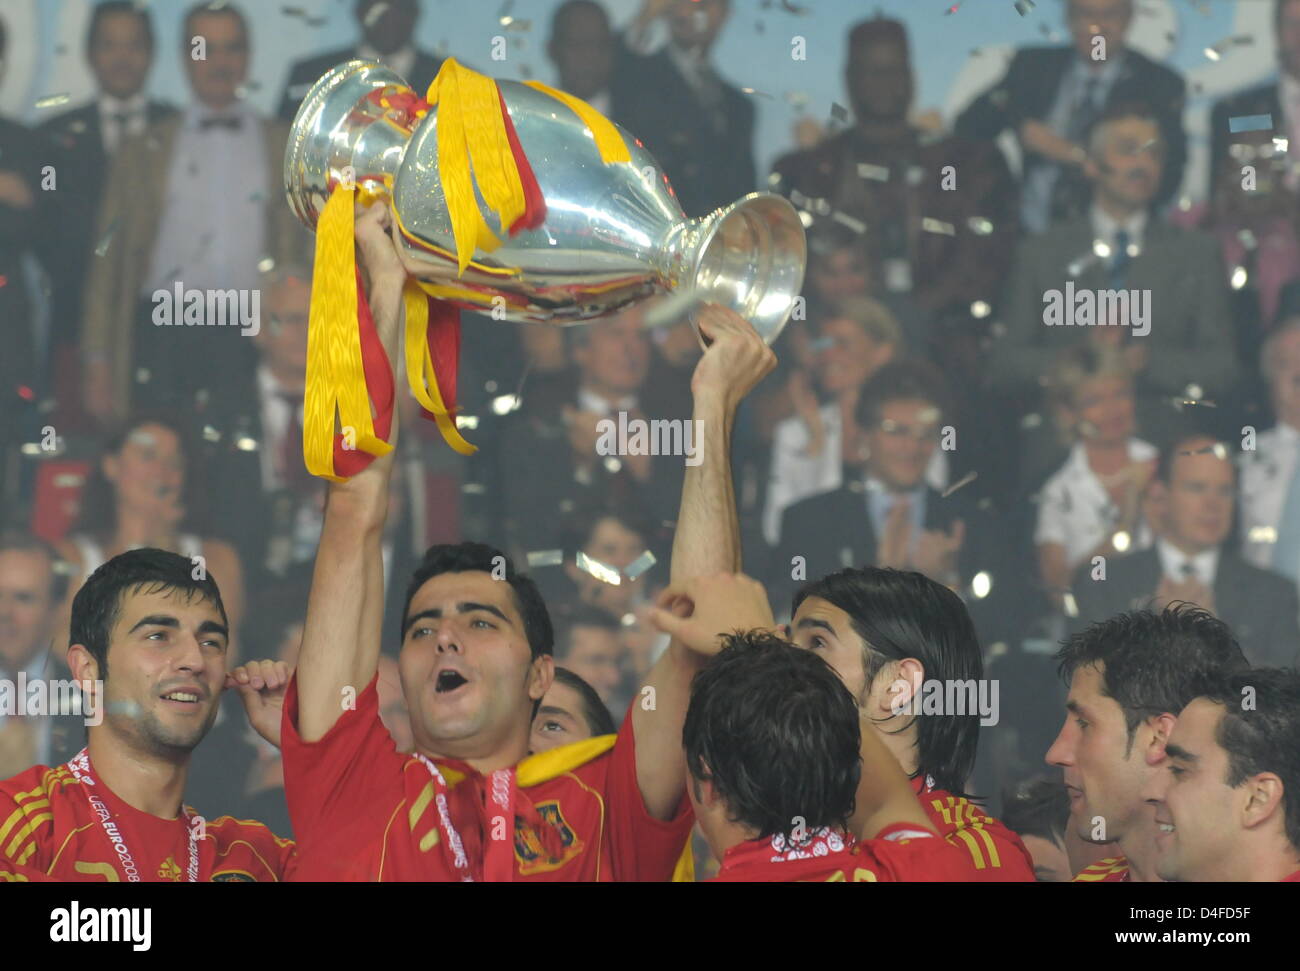 Daniel Guiza of Spain jubilates with the cup after the UEFA EURO 2008 final match between Germany and Spain at the Ernst Happel stadium in Vienna, Austria, 29 June 2008. New European Champion Spain won 0-1. Photo: Achim Scheidemann dpa +please note UEFA restrictions particulary in regard to slide shows and 'No Mobile Services'+ +++(c) dpa - Bildfunk+++ Stock Photo